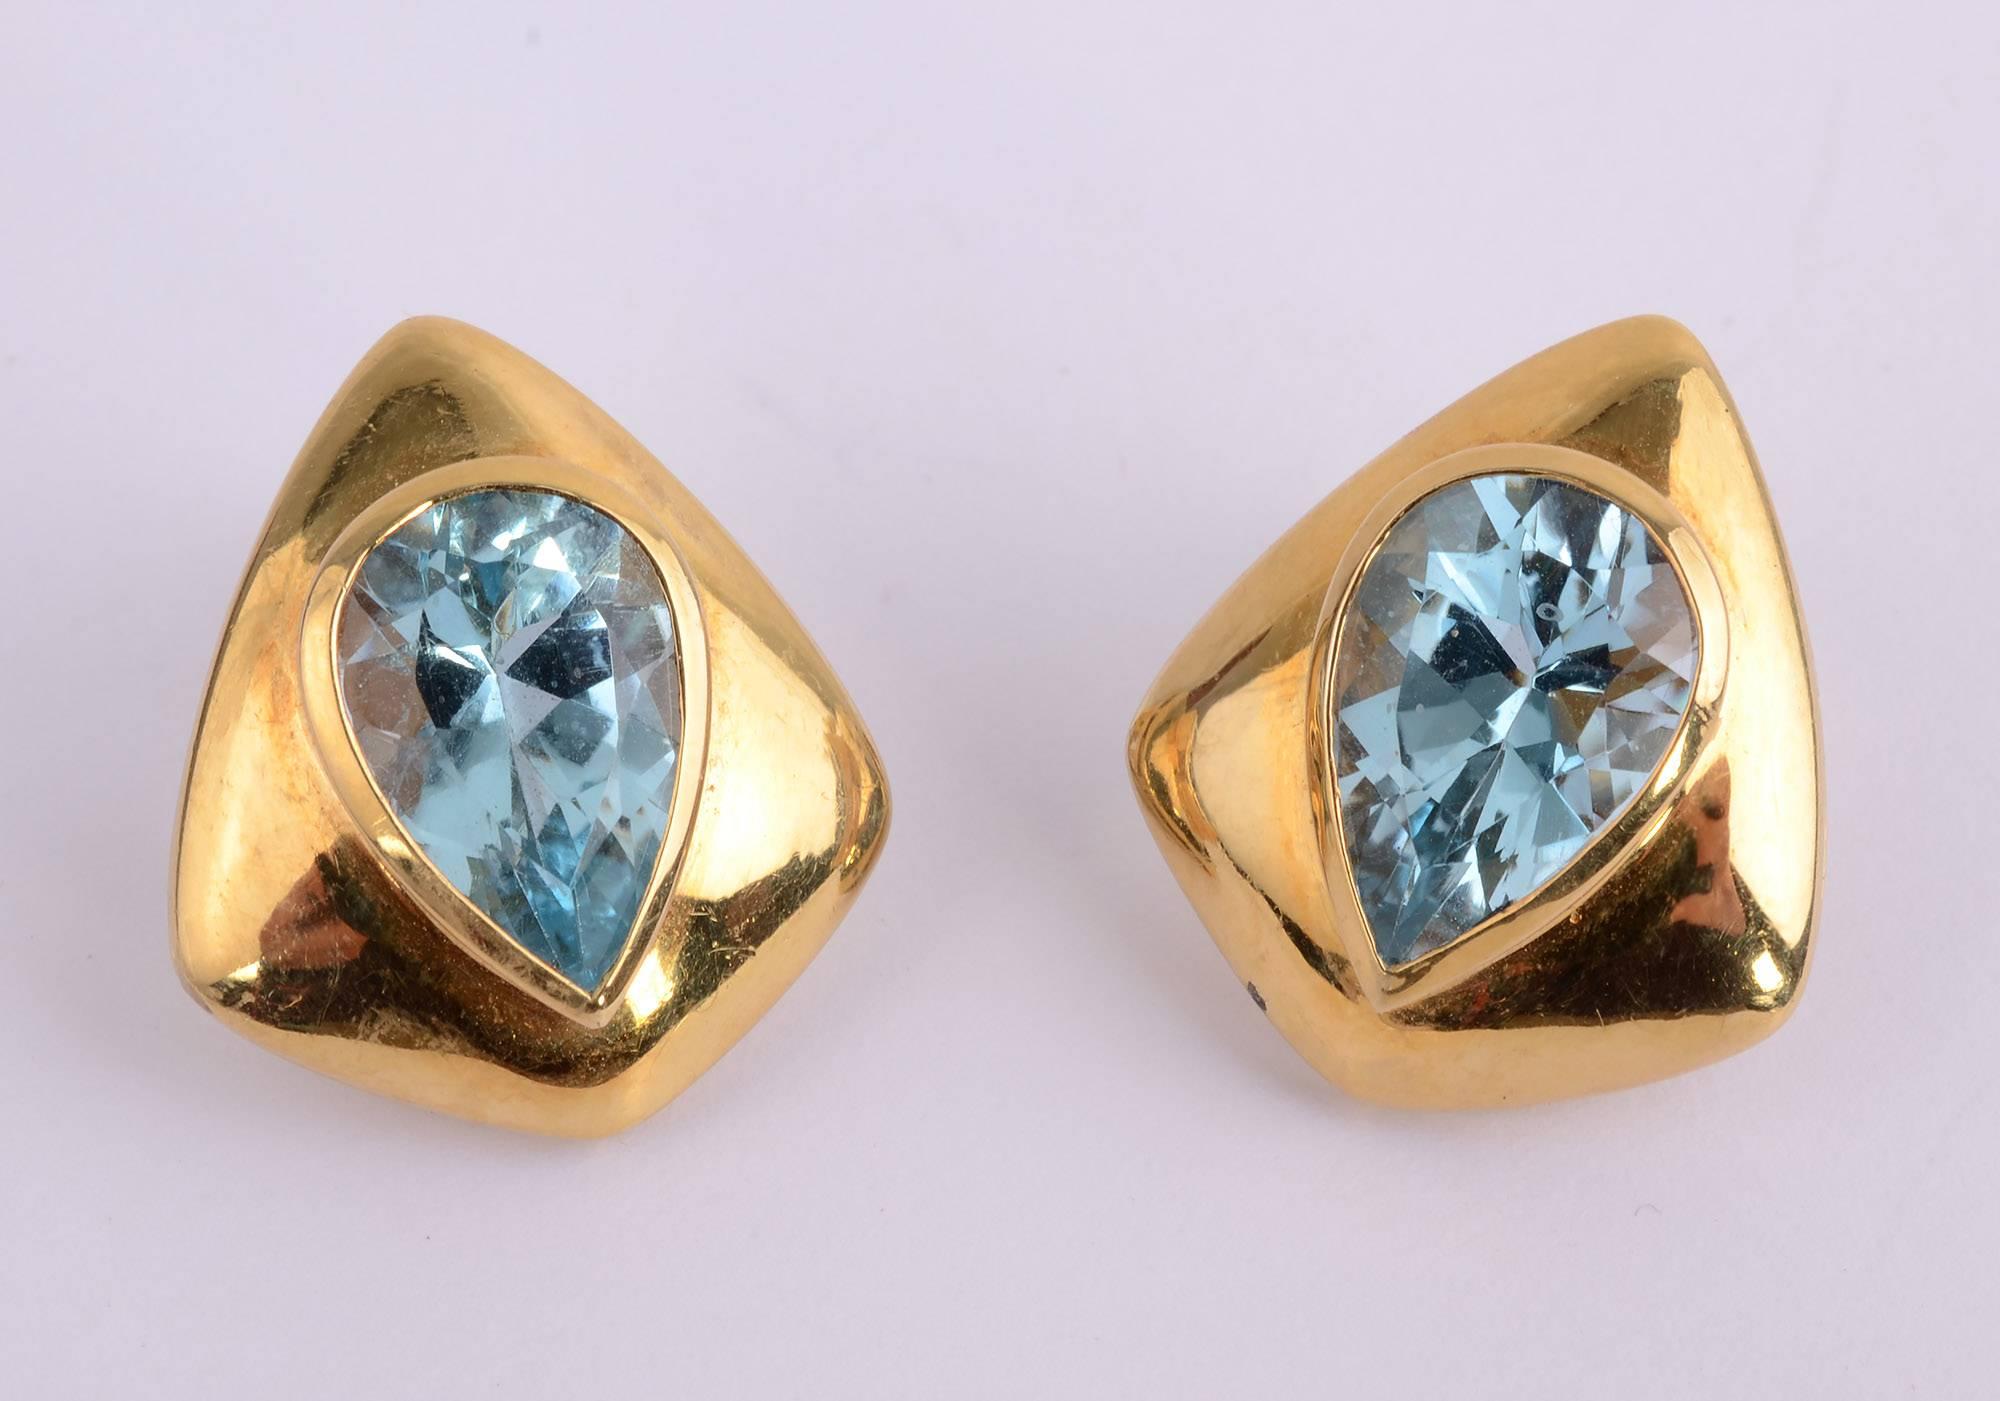 Modernist 18 karat with blue topaz earrings by H. Stern. The pear shaped stones are  the reverse of the gold in which they are set making for an interesting design. The earrings are 15/16 